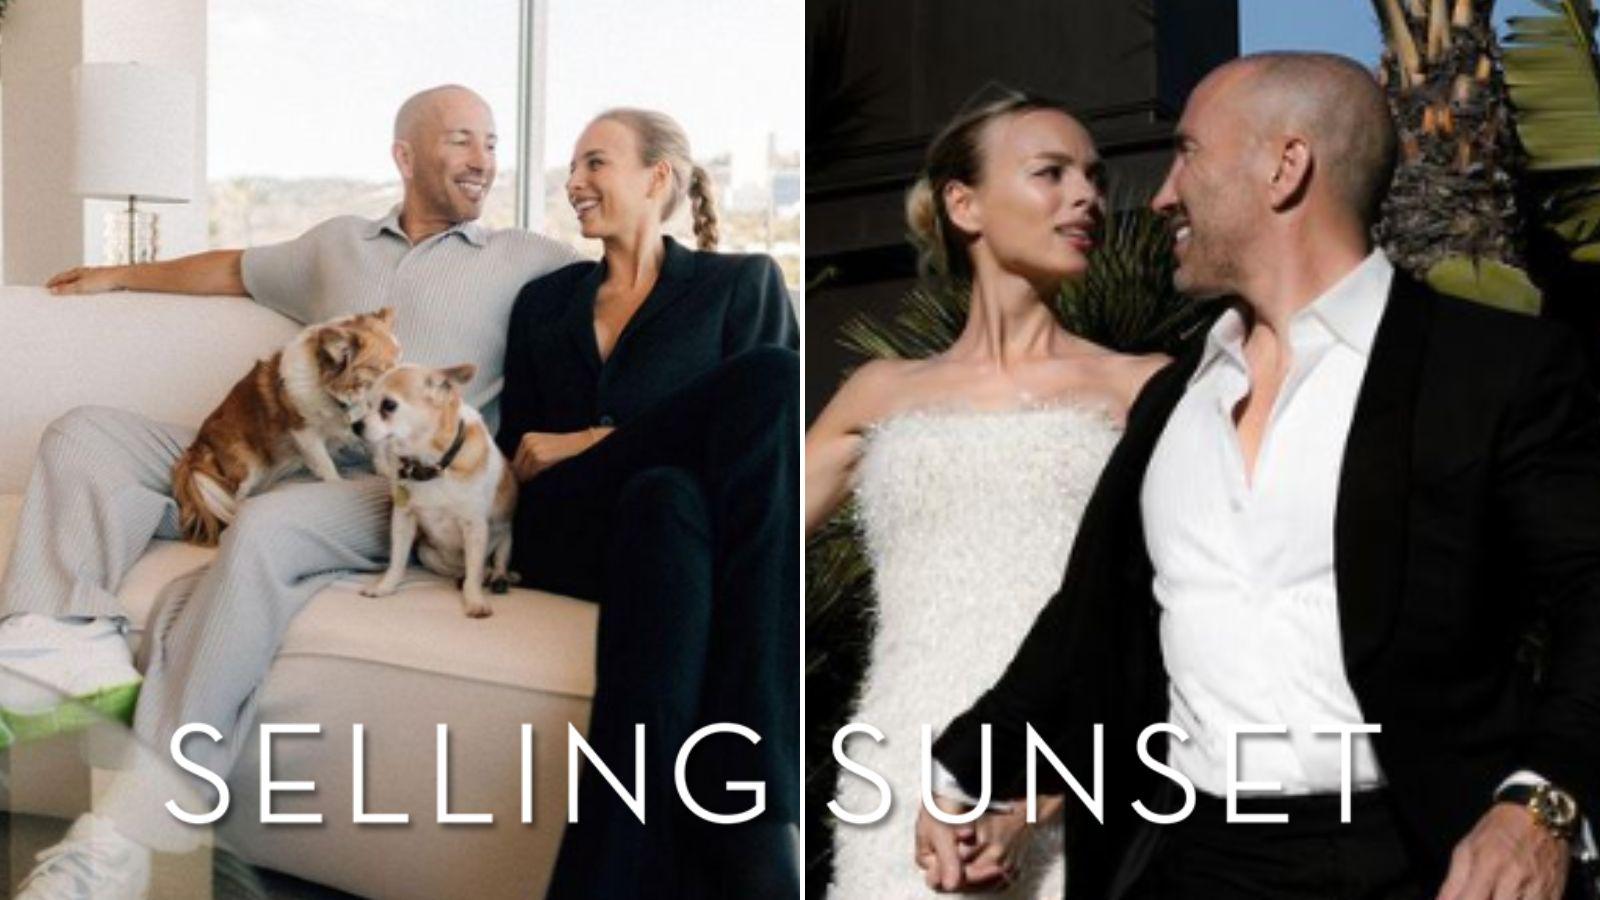 Selling Sunsets Jason Oppenheim Says He Still Talks To Ex Marie Lou Nurk “almost Every Day 4507